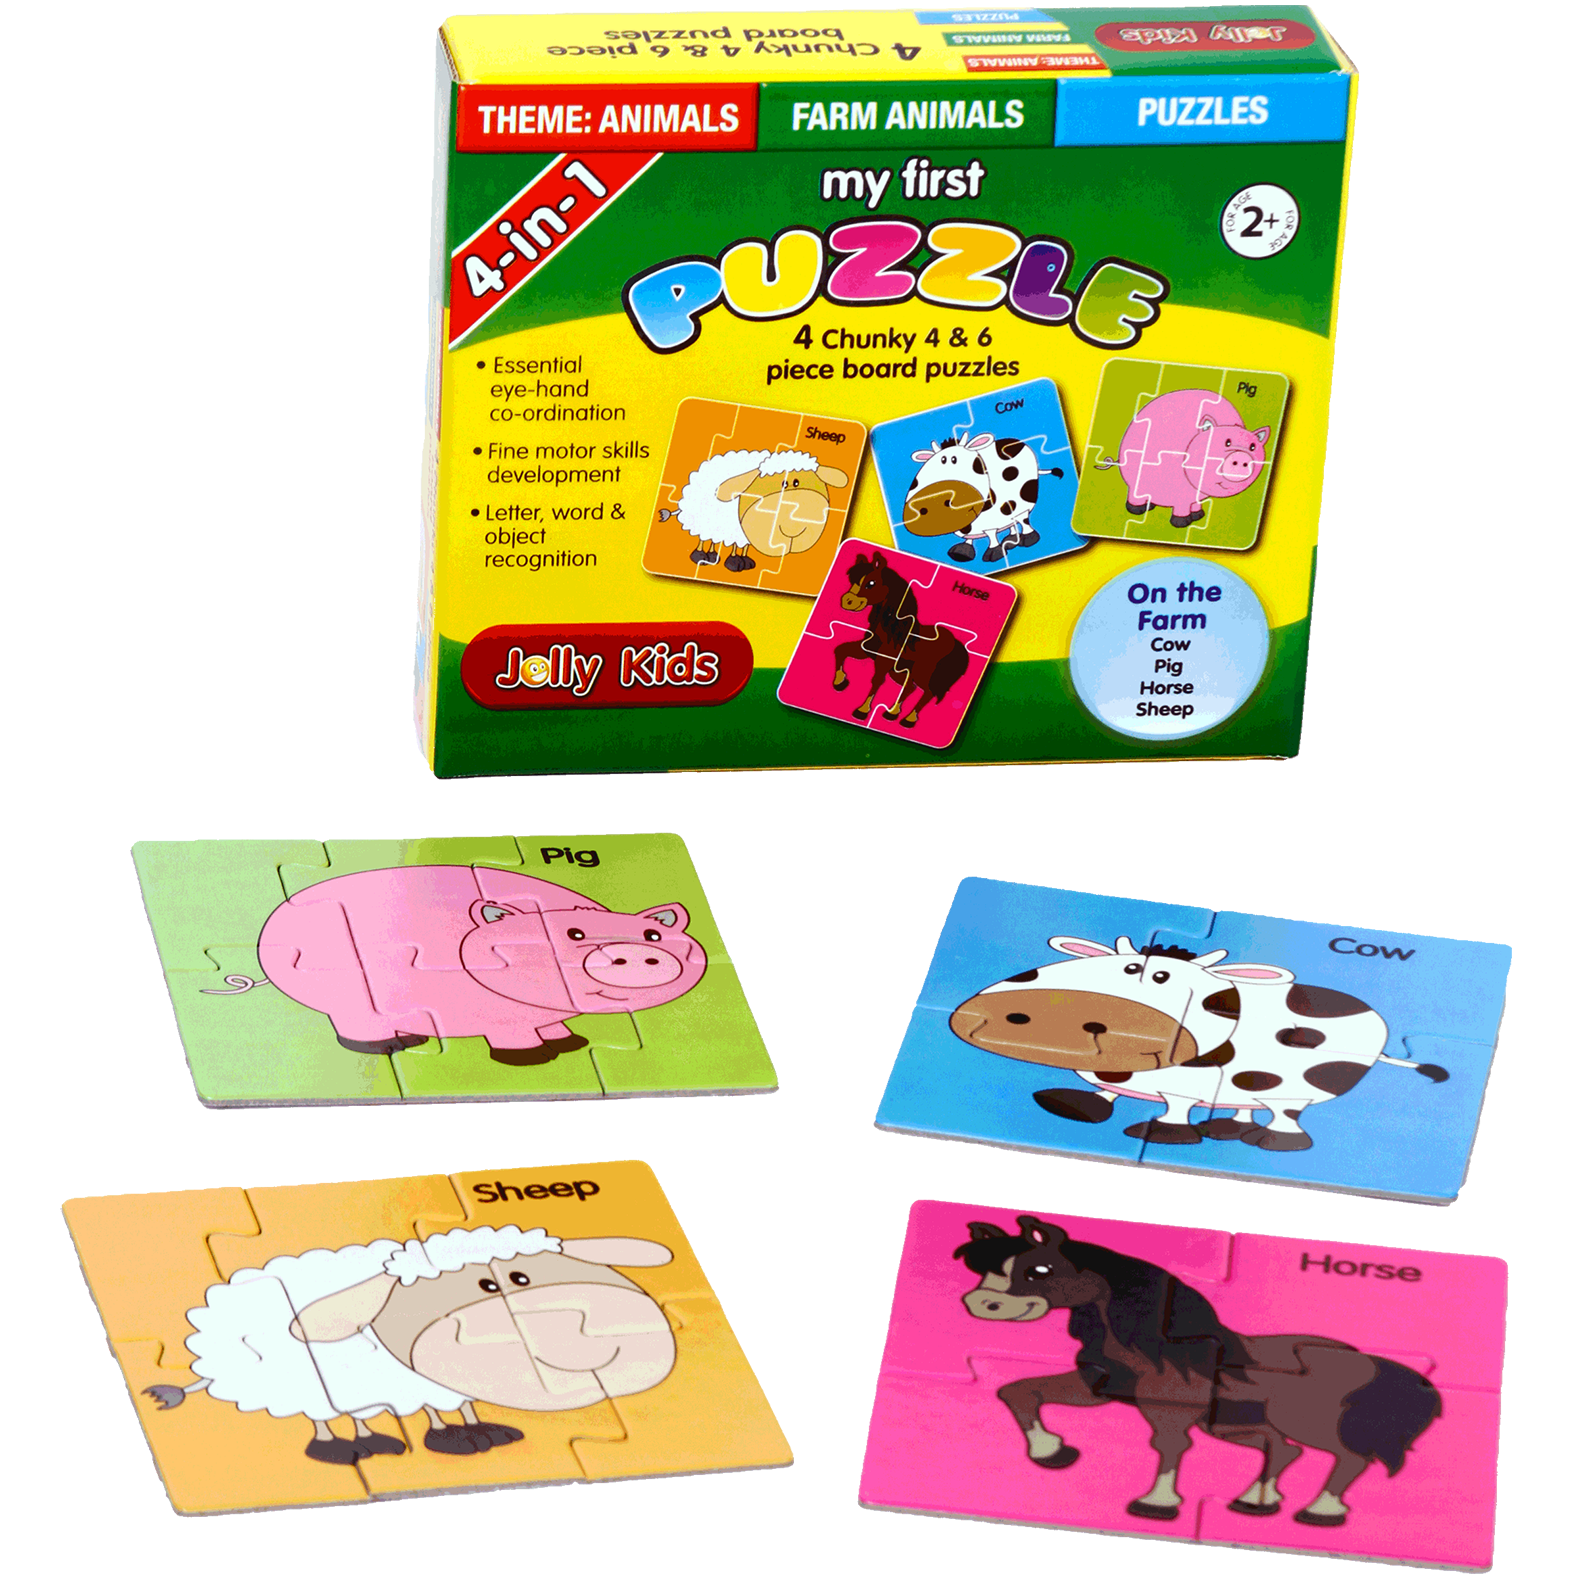 4 In One Set. 4 x Chunky 4 & 6 Piece Puzzles. Theme Animals - Farm Animals. Doing Puzzles Can Be Considered A Complete Brain Exercise. Greater Attention To Detail. Essential for Hand And Eye Coordination. Encourages Fine Motor Skills Development. Letter, Word And Object Recognition. Ages 2+